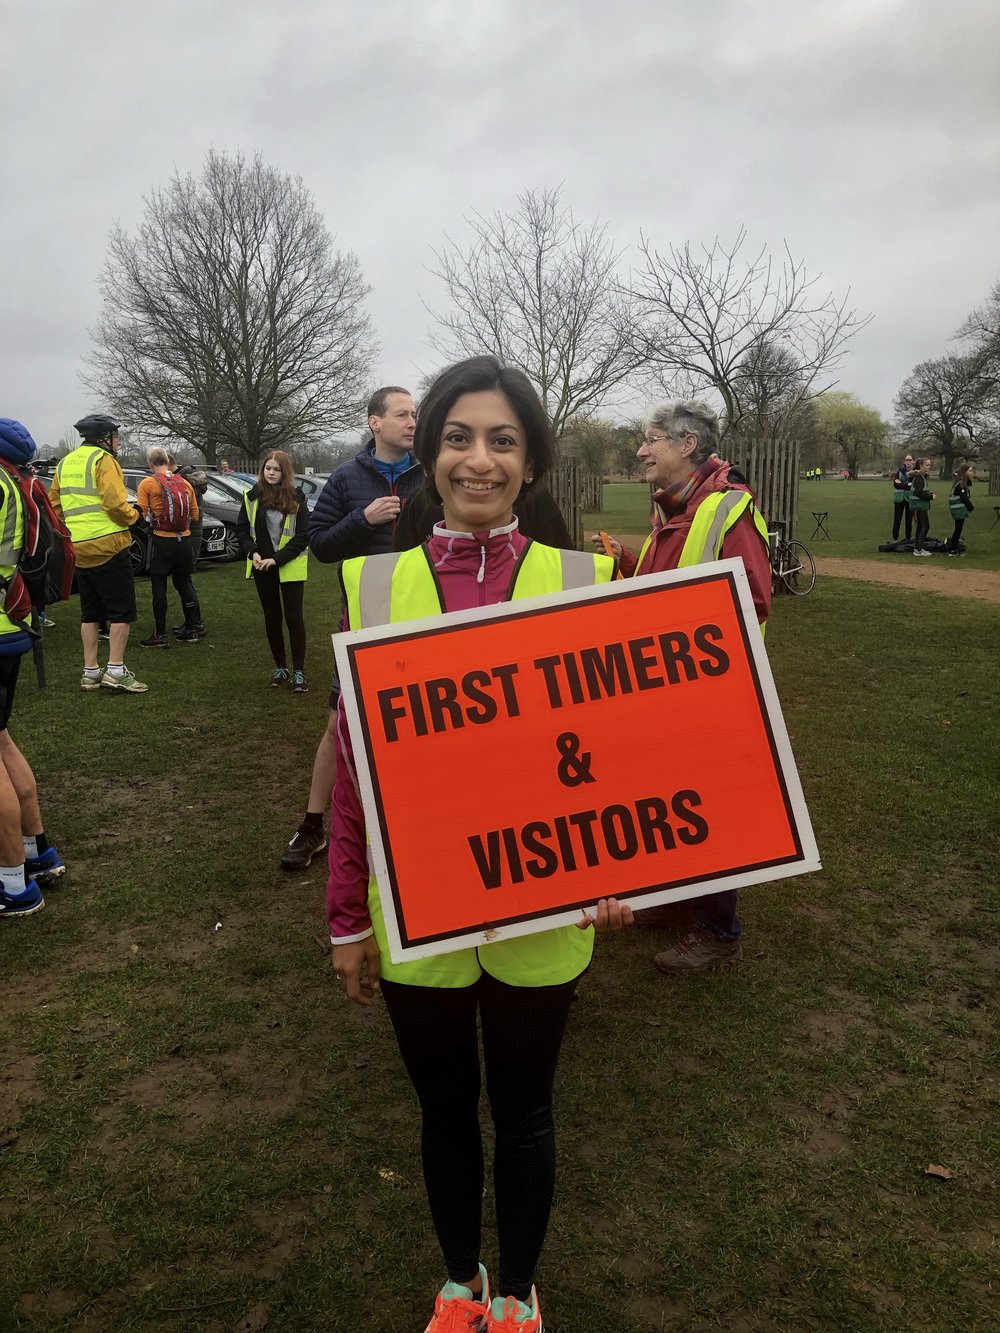 Holding the placard for briefing new runners and visitors. Communication breaks down barriers! (Image: Sumi Sarma)